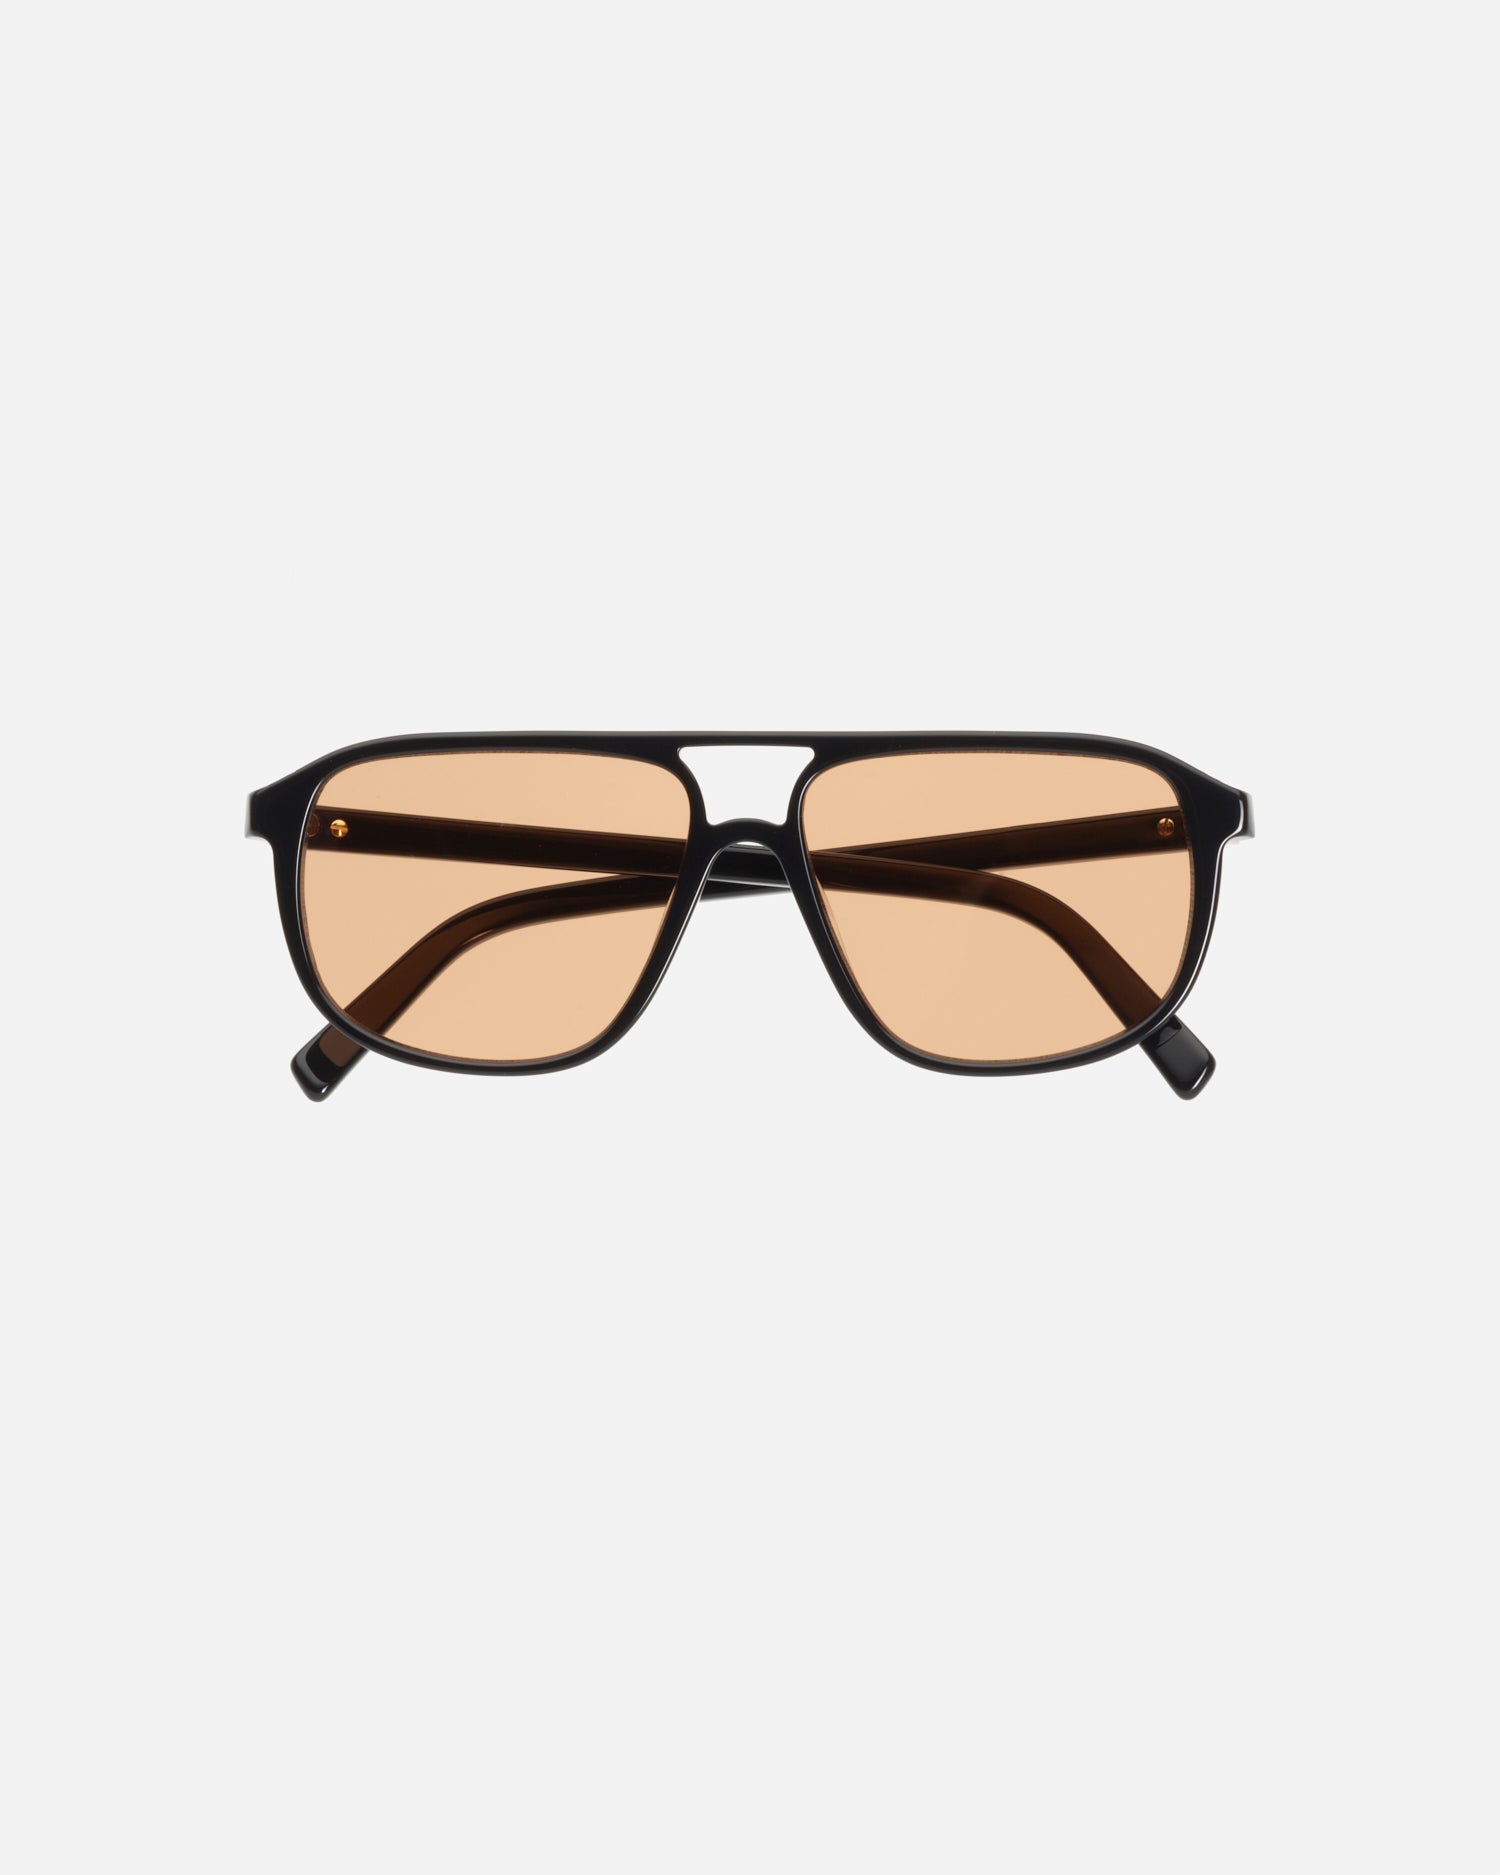 La Touriste luxe sunglasses by Velvet Canyon in Black & Amber